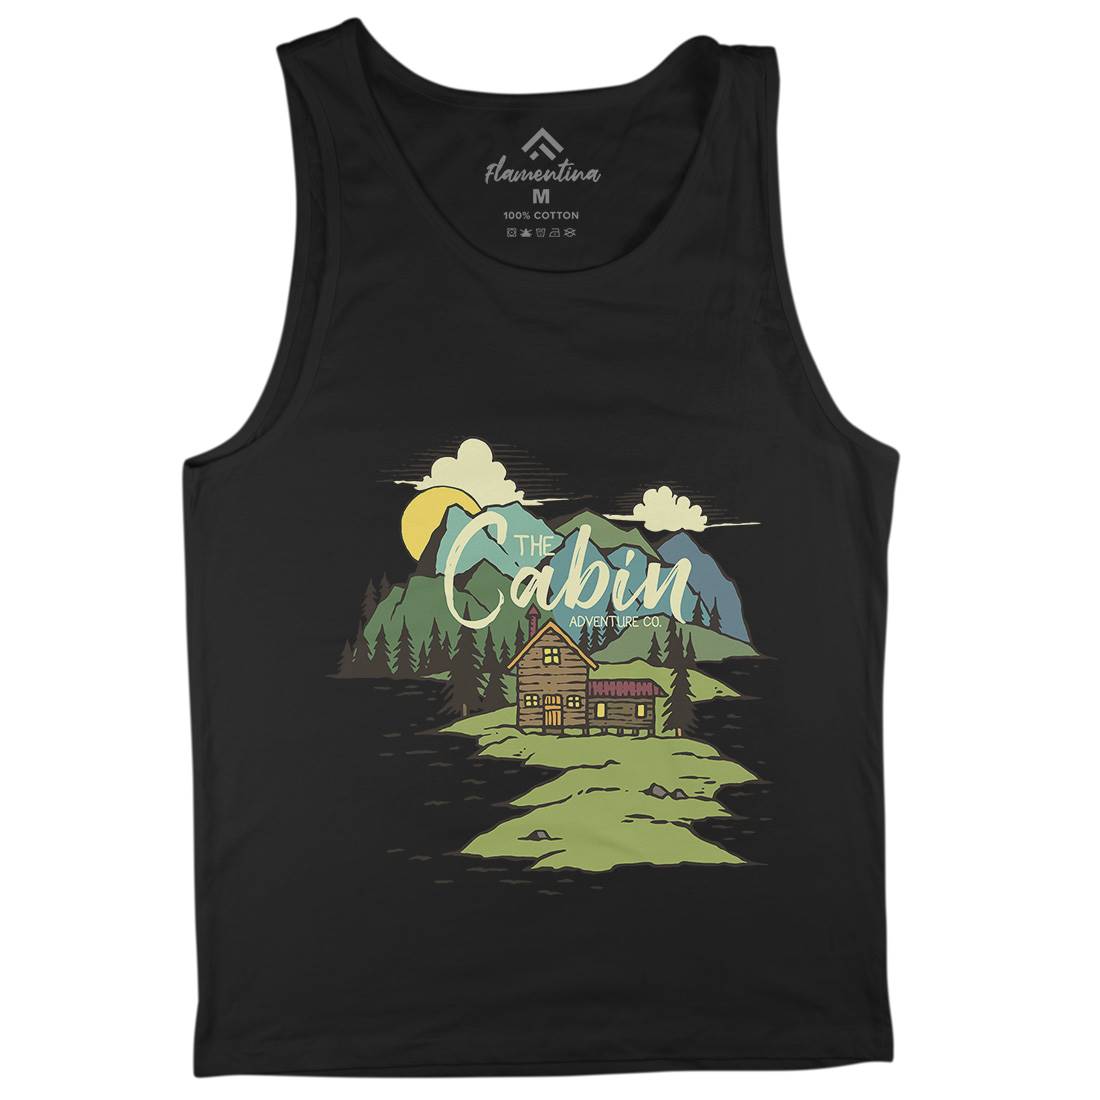 The Cabin On Lake Mens Tank Top Vest Nature C787